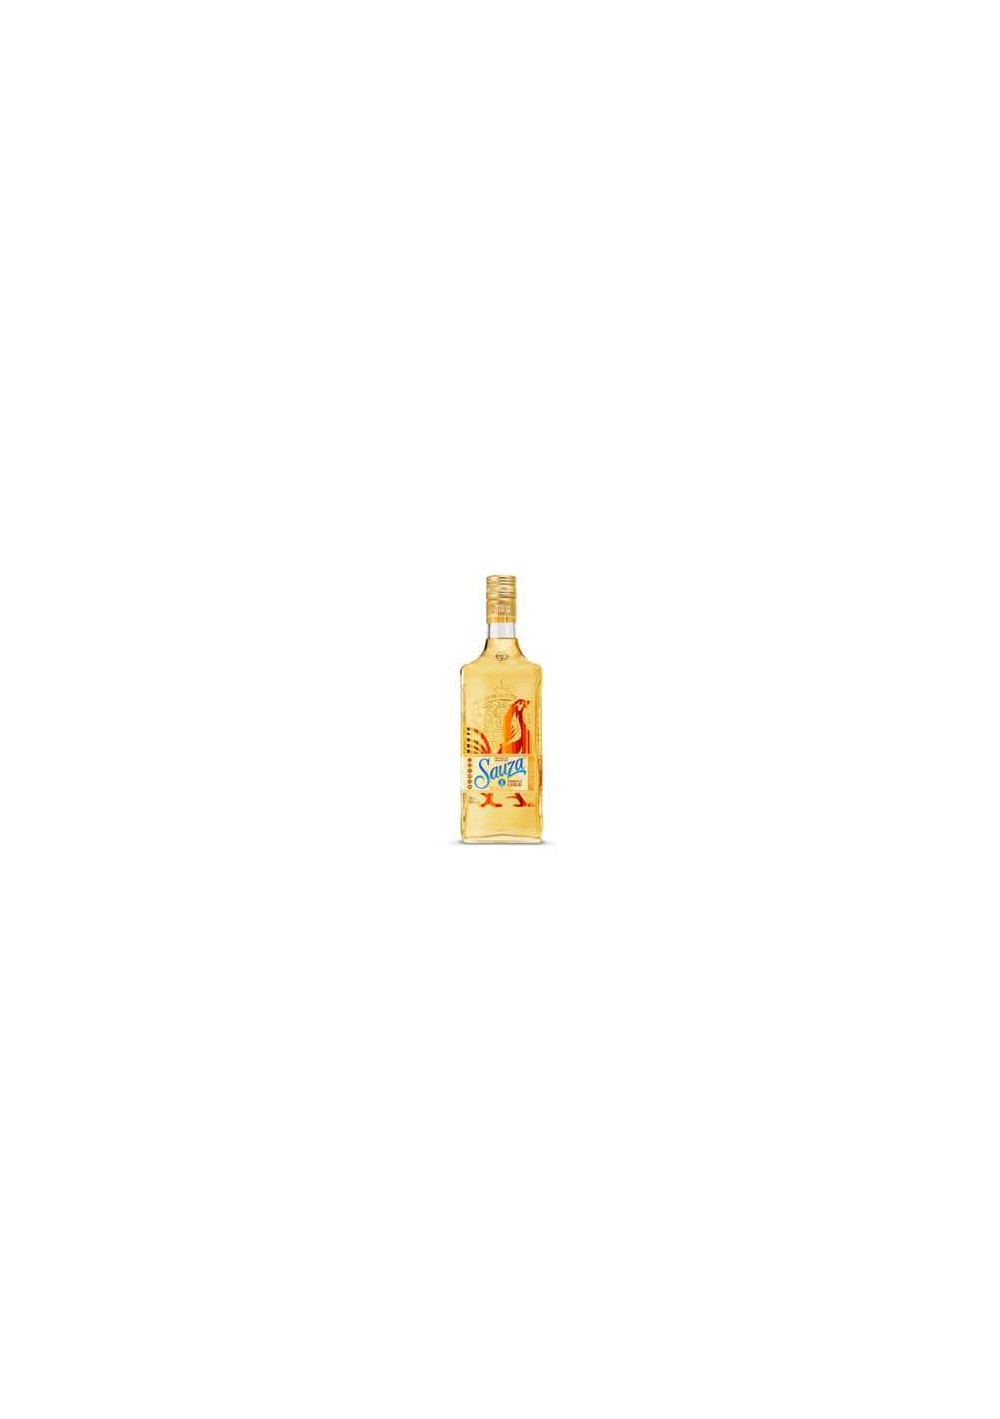 Tequila Sauza - Gold - (70cl)